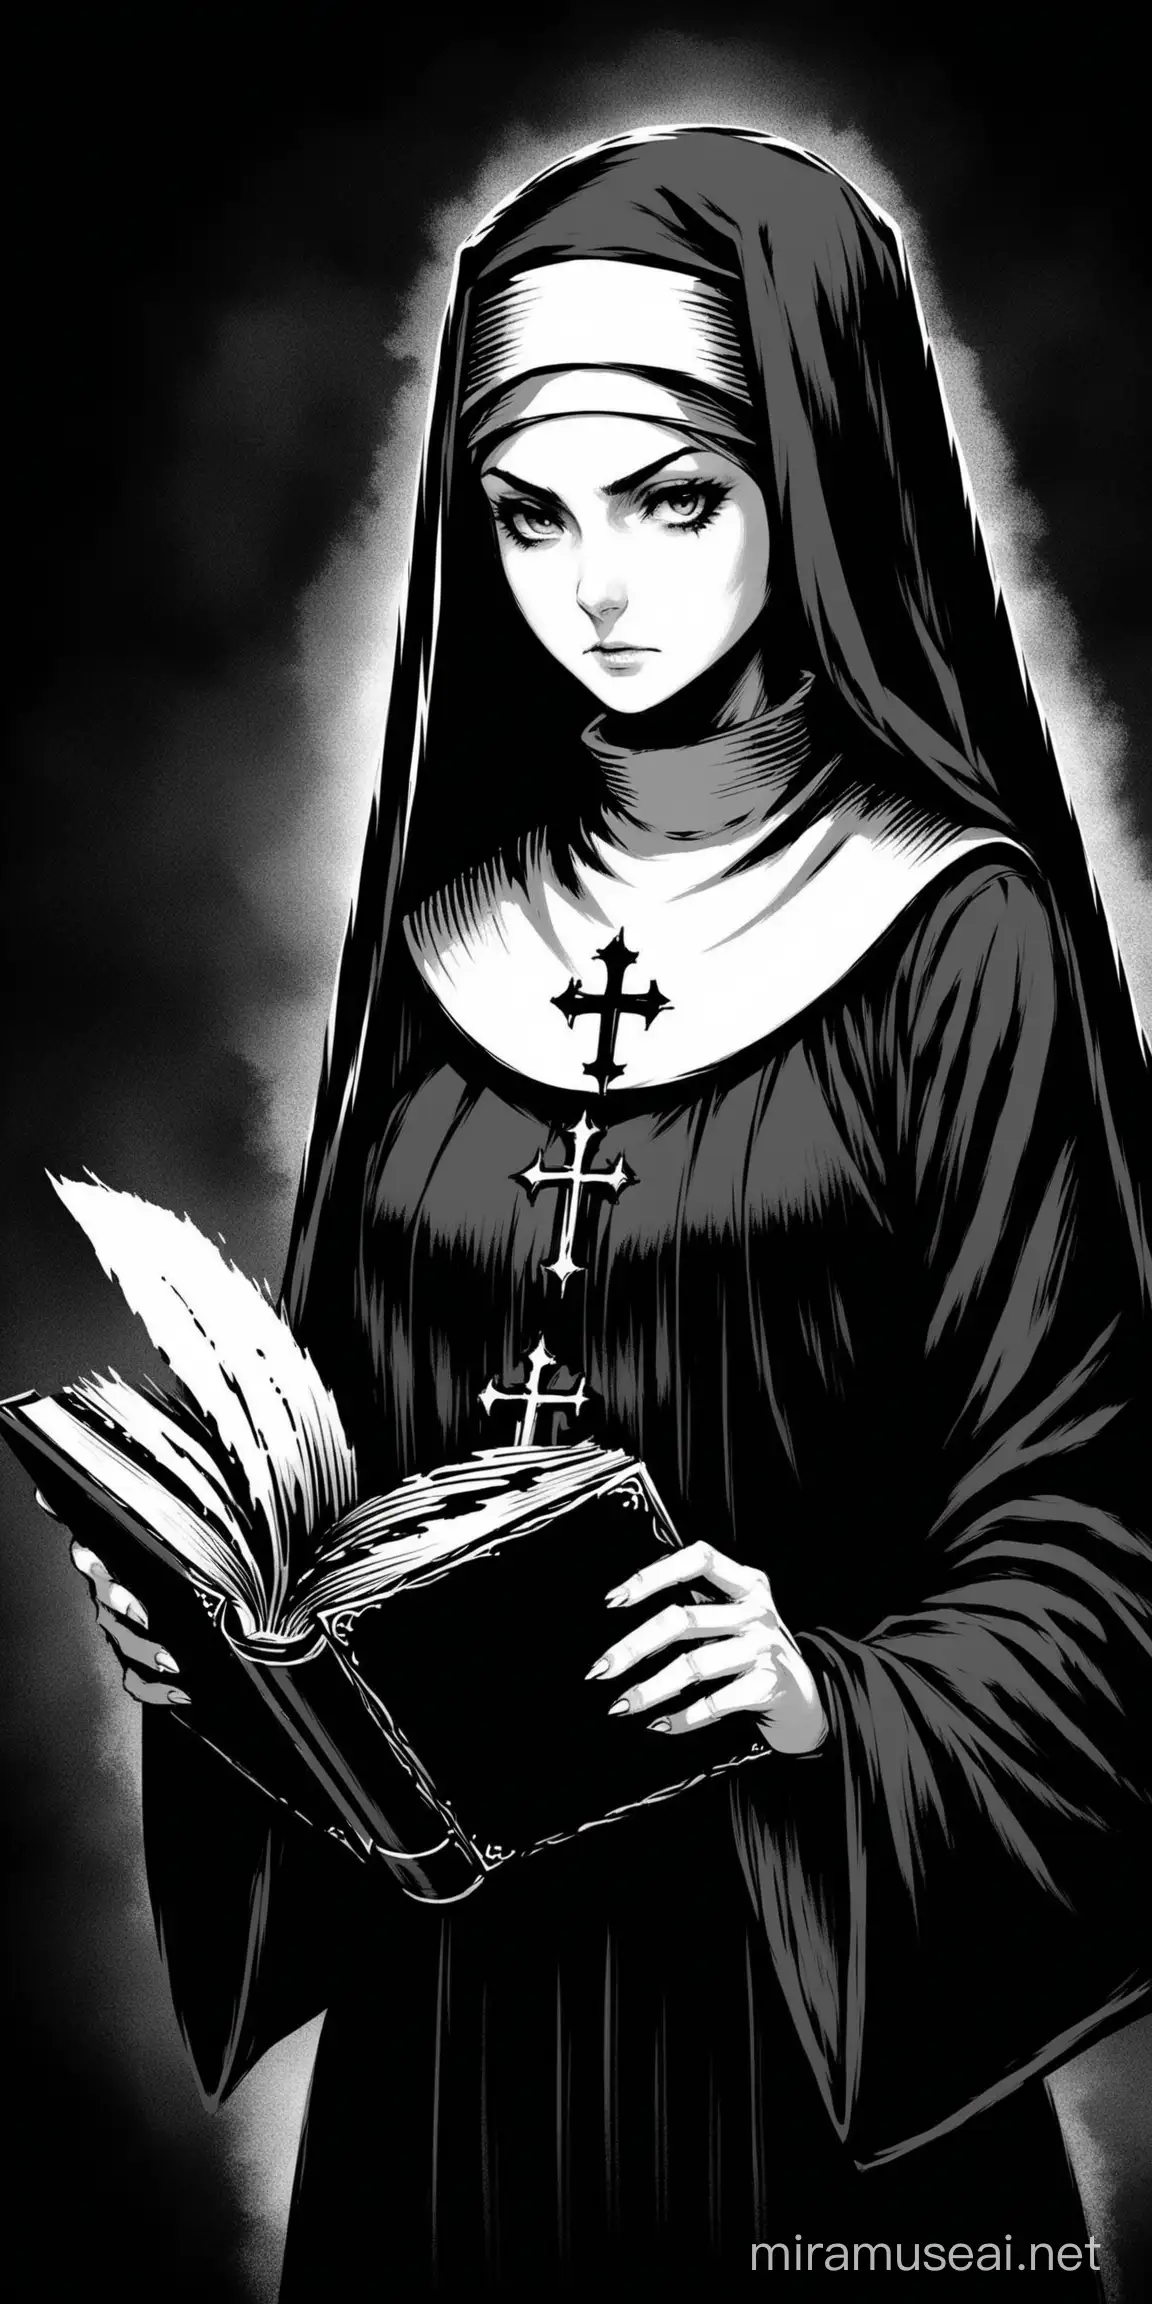 holding book, serious, nun, ink painting, only black and white, monochrome, darkest dungeon style